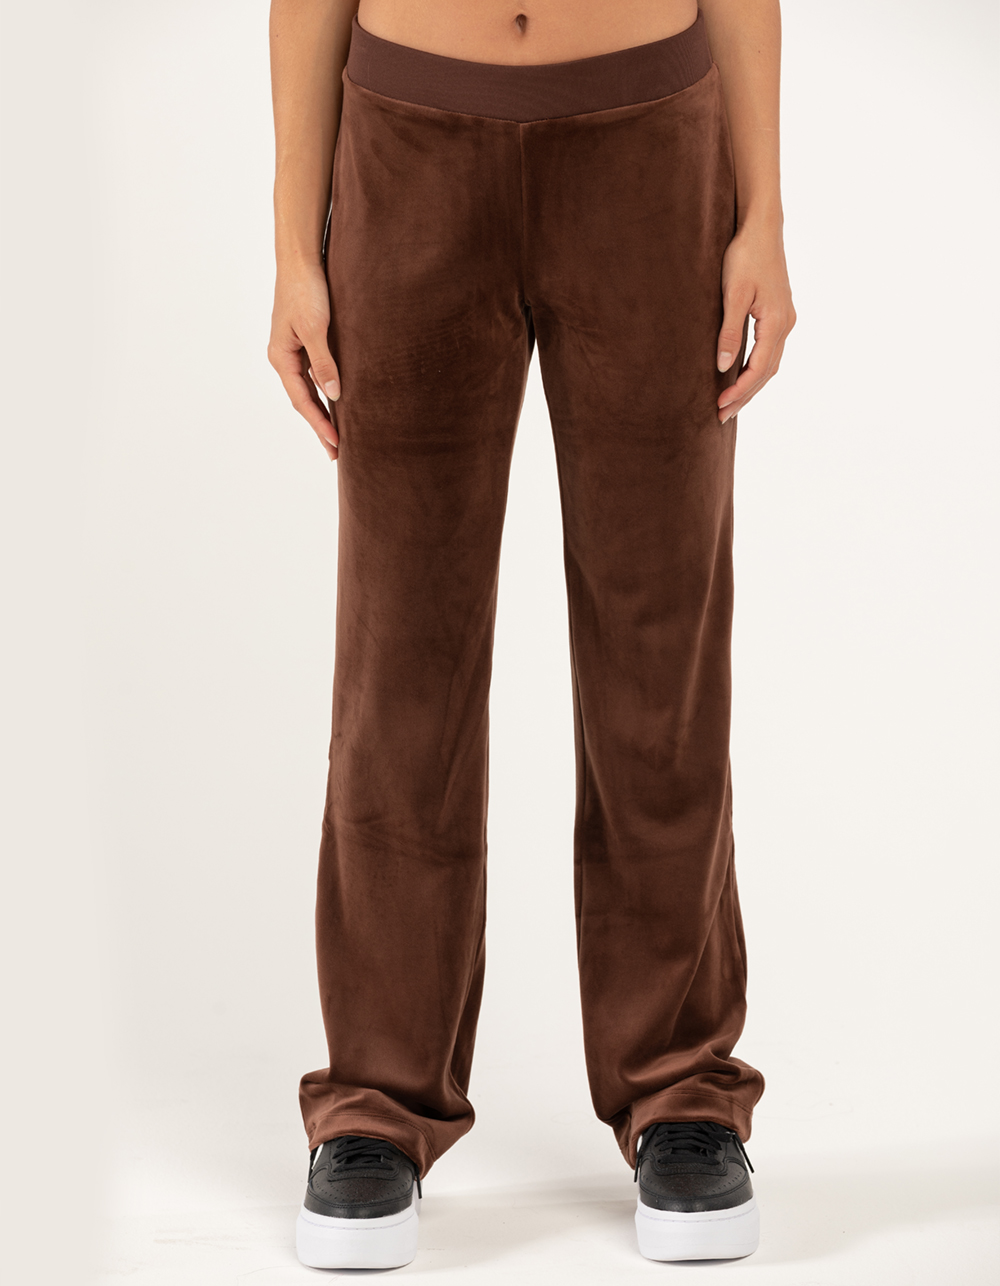 JUICY COUTURE OG Bling Womens Pants - BROWN | Tillys